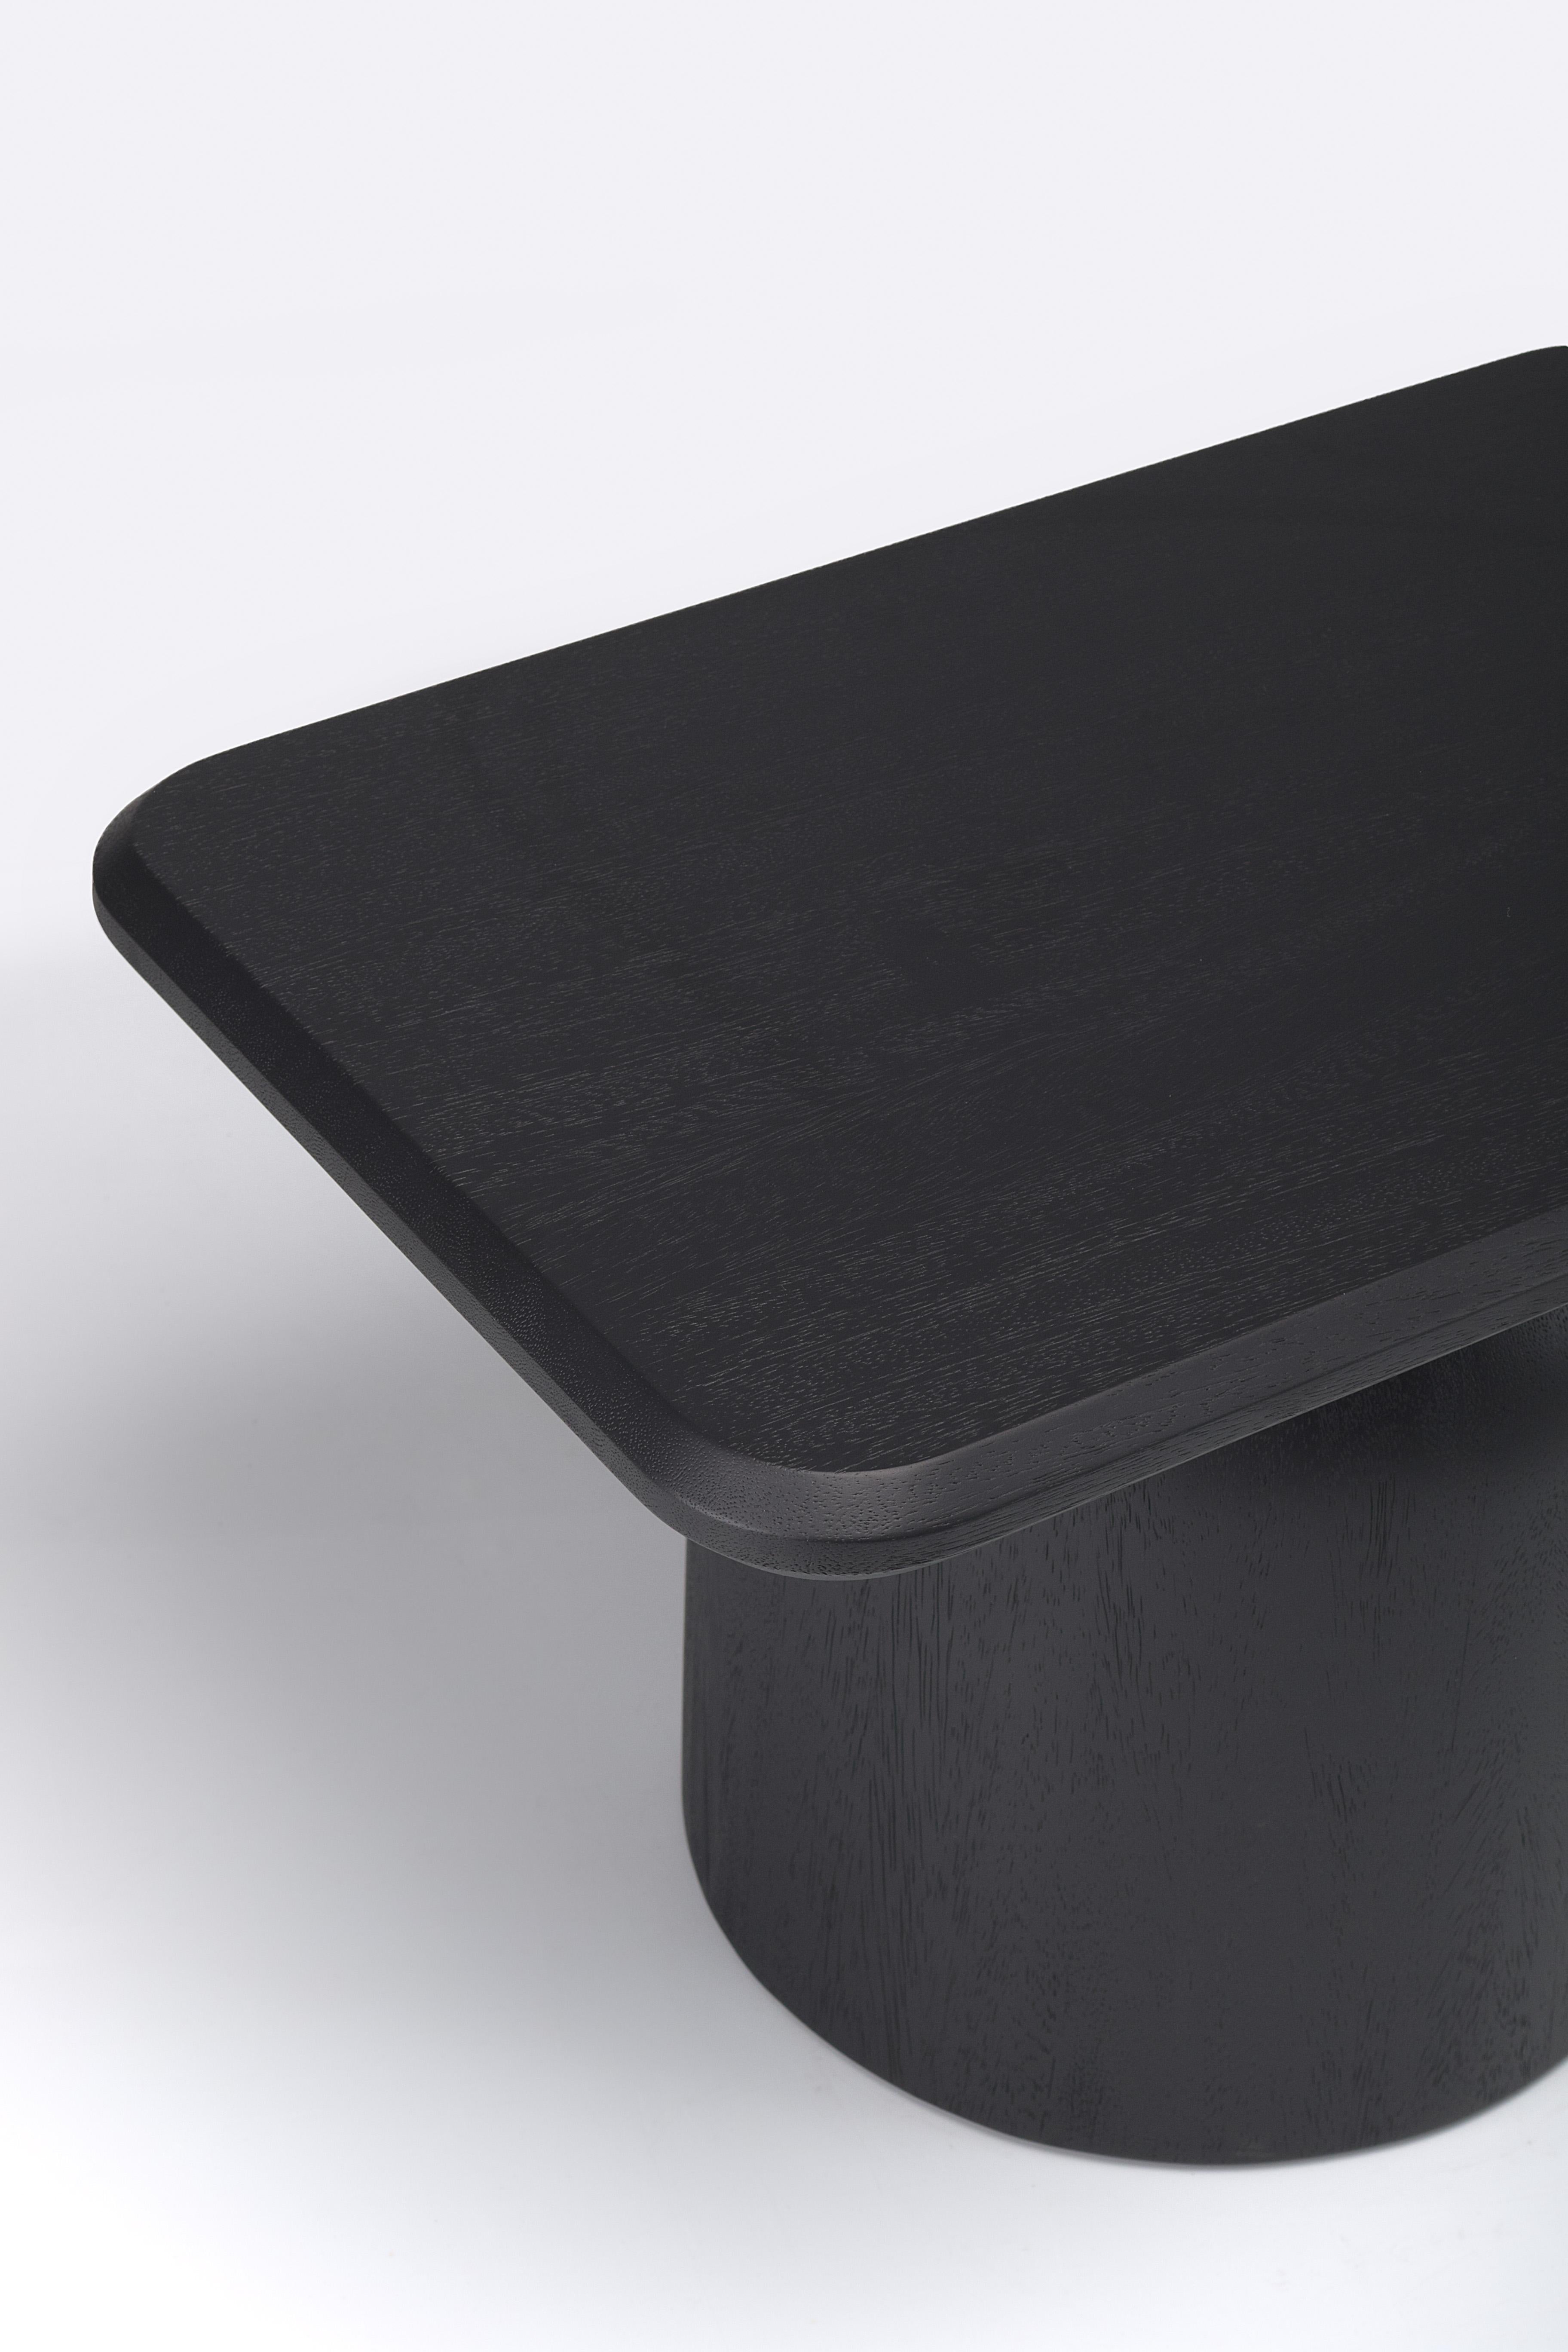 Brushed Cupola Rectangular Table Black Stain For Sale